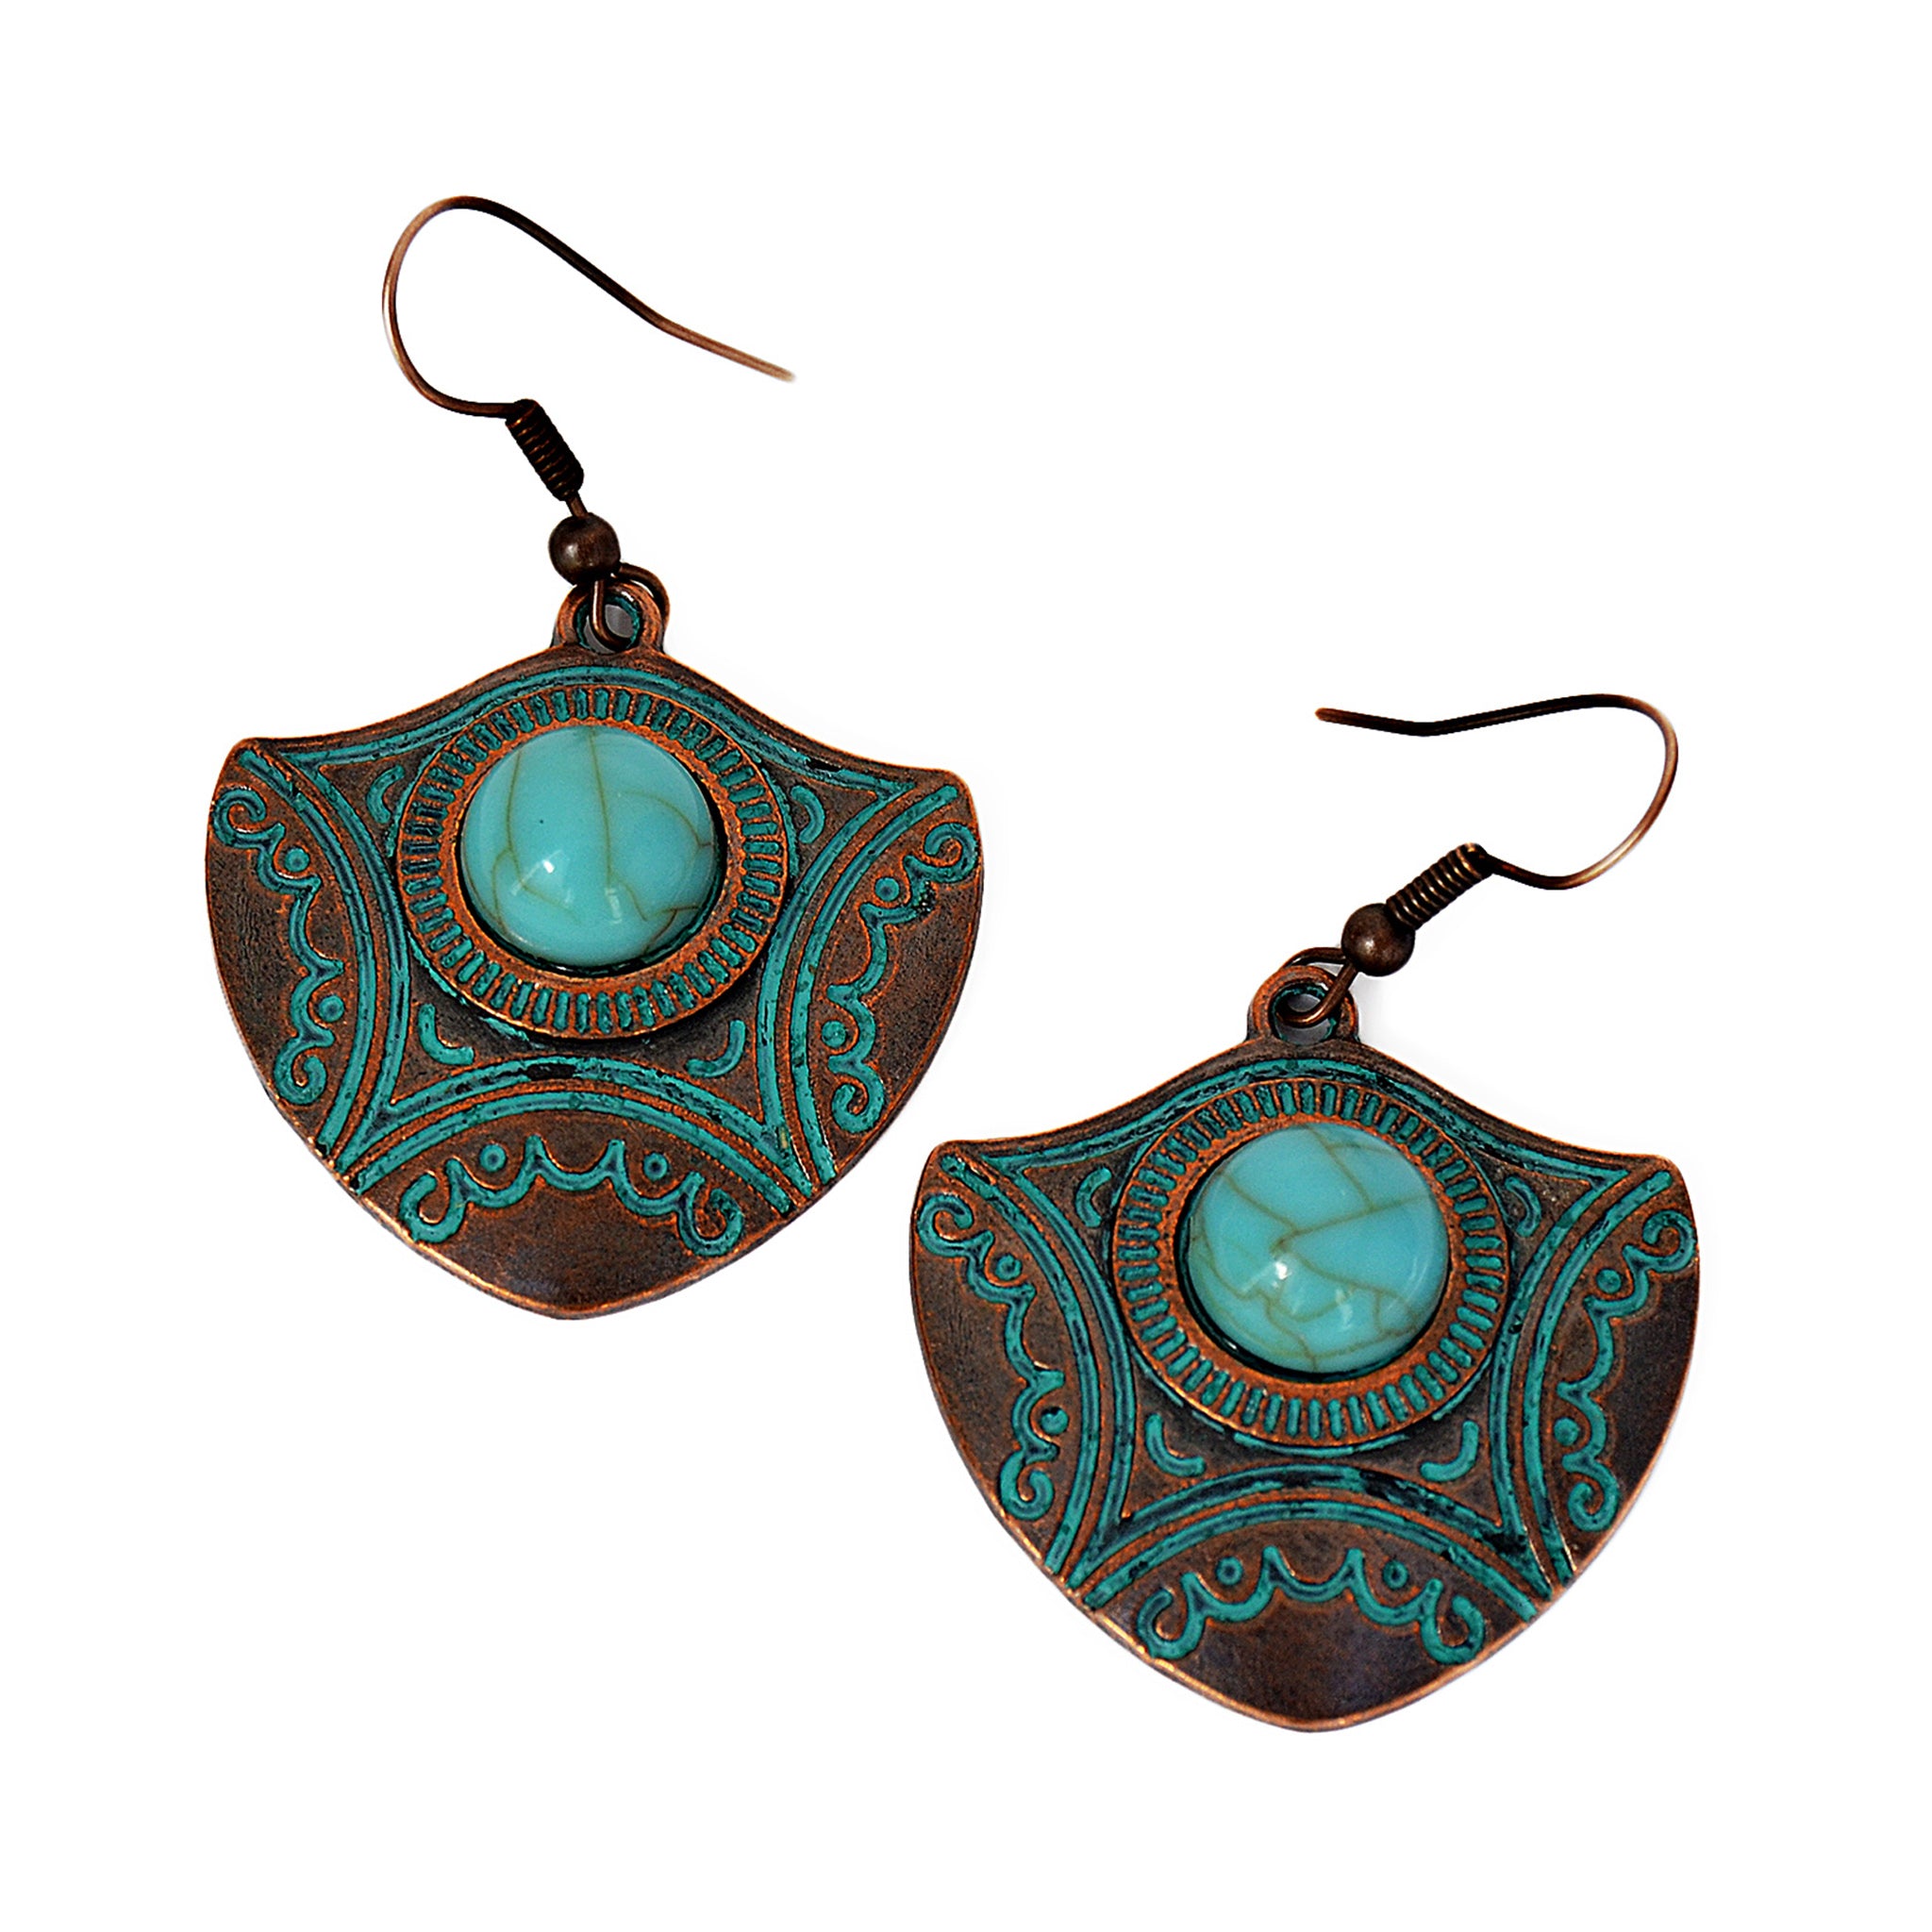 Tribal arrow earrings with turquoise bead and blue patina on copper